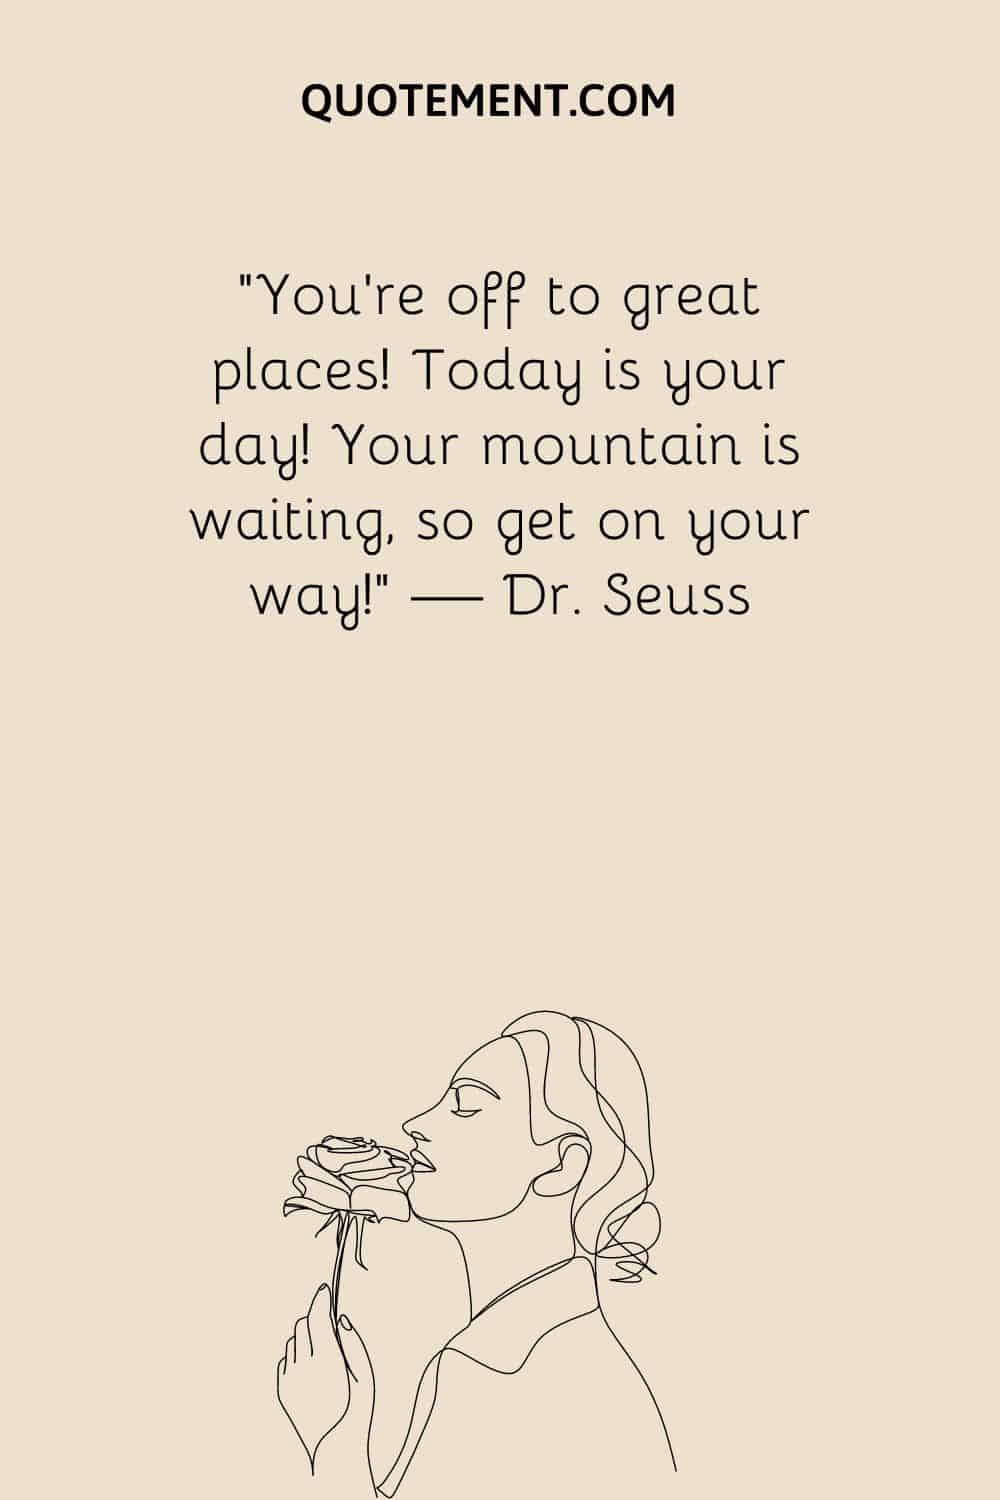 You’re off to great places! Today is your day! Your mountain is waiting, so get on your way